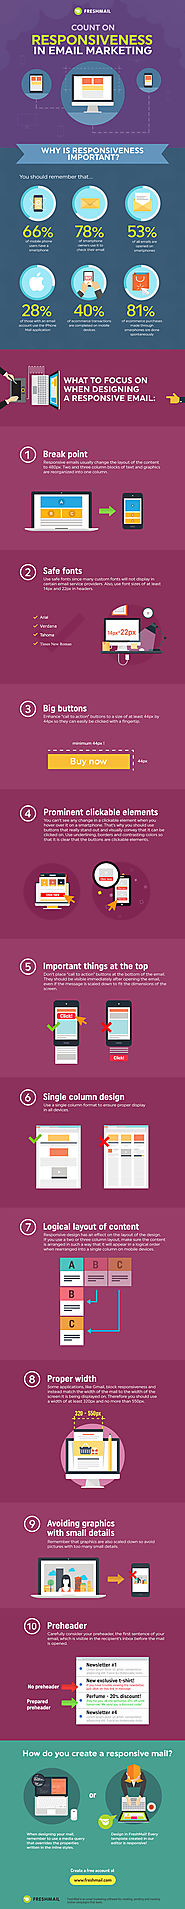 Make responsive email newsletters! #infographic | FreshMail Email Marketing Blog